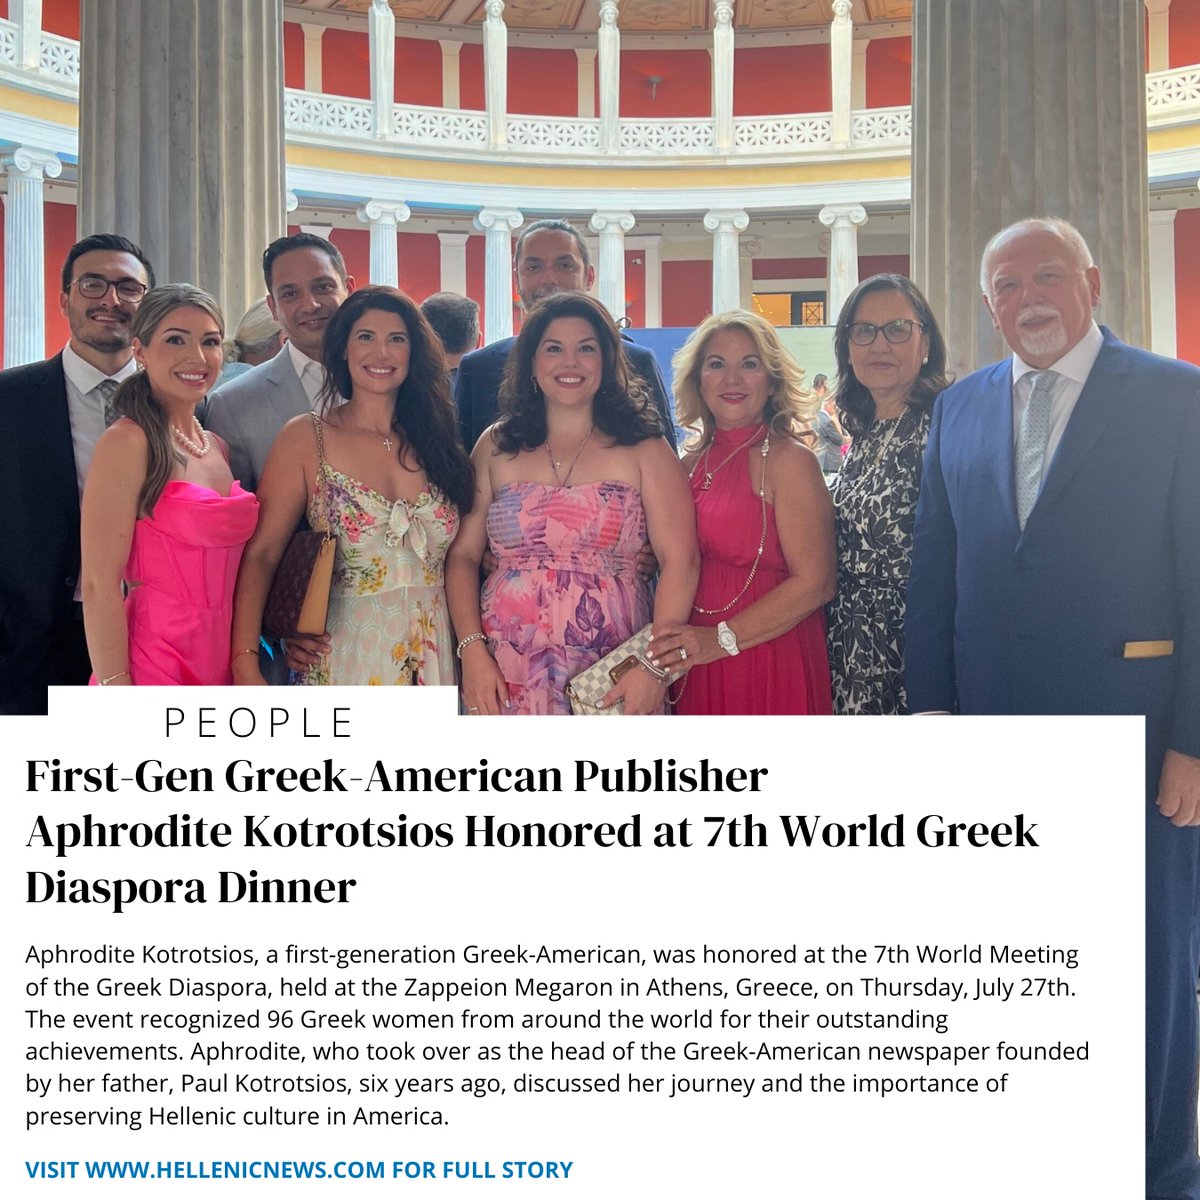 We're thrilled to celebrate one of our own, first-generation Greek-American publisher Aphrodite Kotrotsios, who was honored at the prestigious 7th World Greek Diaspora Dinner! 🔗 l8r.it/BGx1 #GreekDiaspora #AphroditeKotrotsios #CommunityLeader #HellenicNews